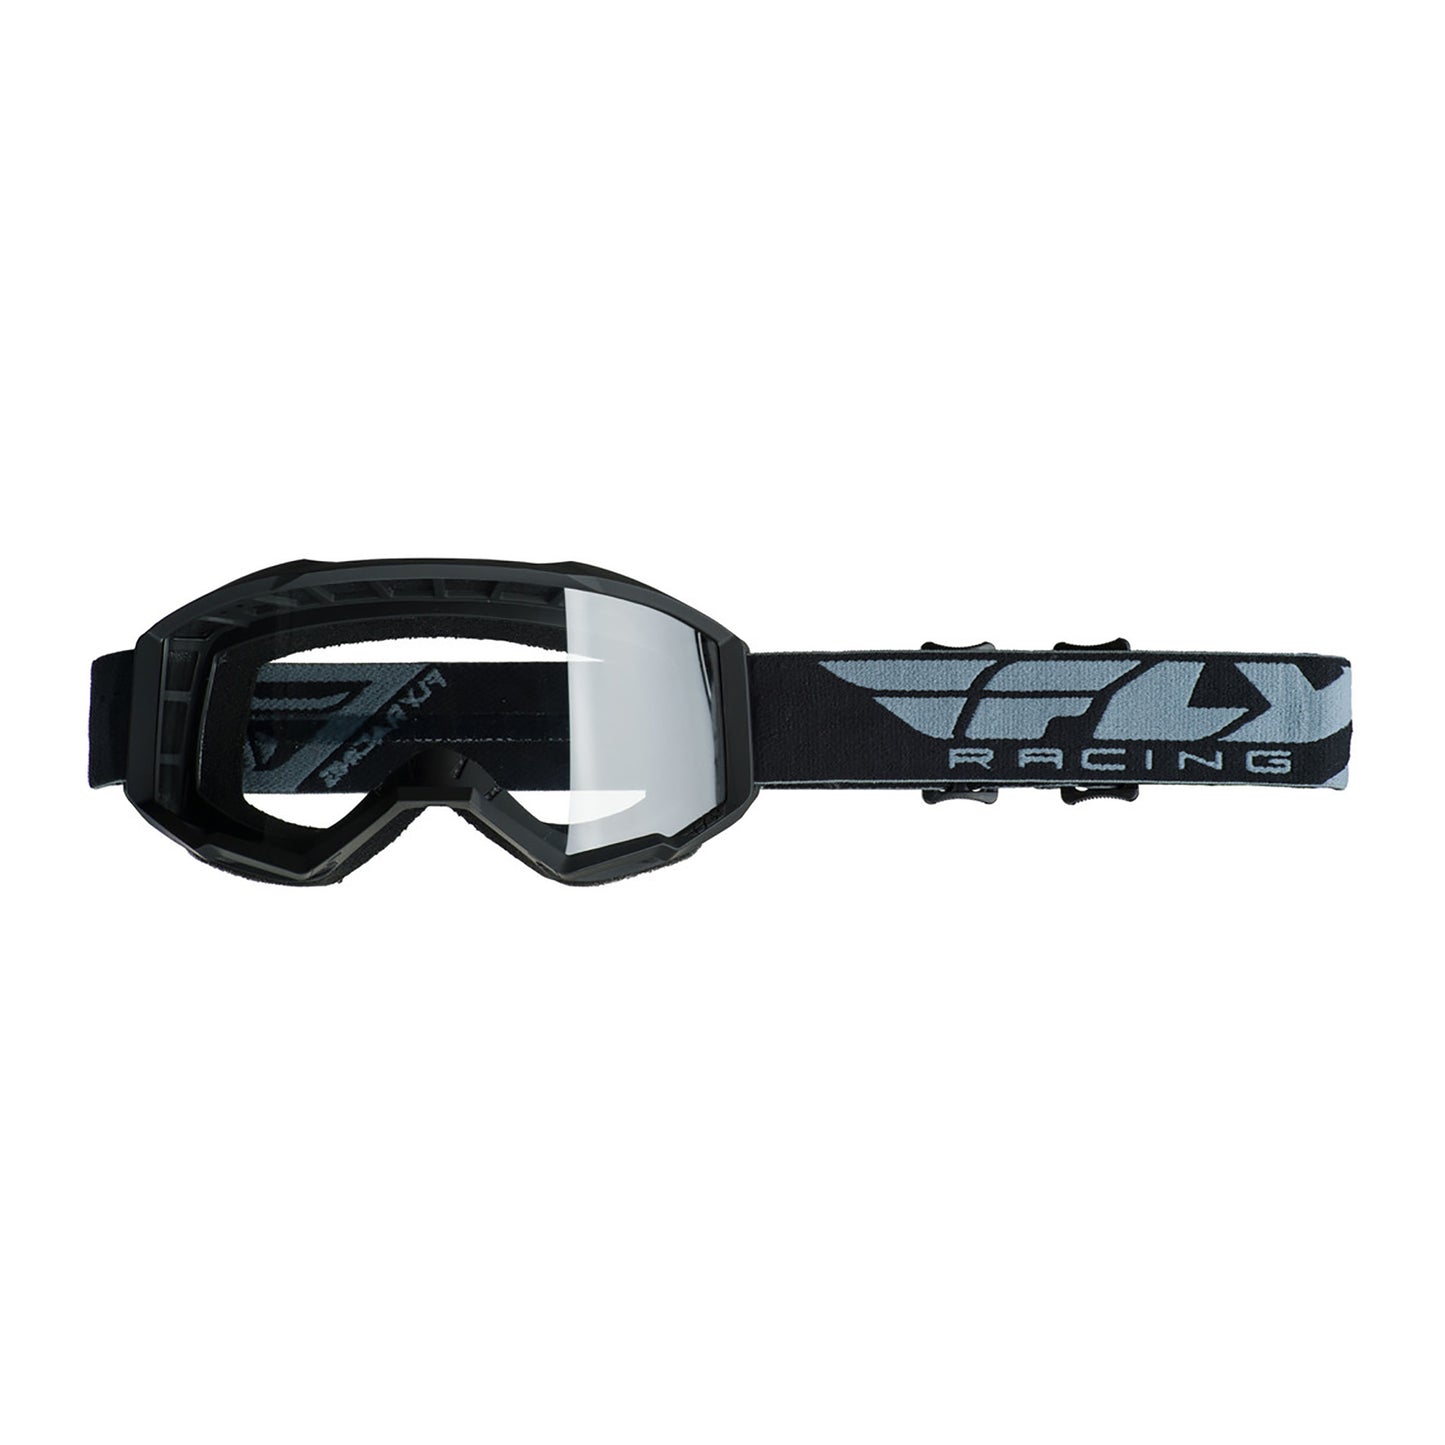 Fly Racing Youth Focus Goggles 2021 Model